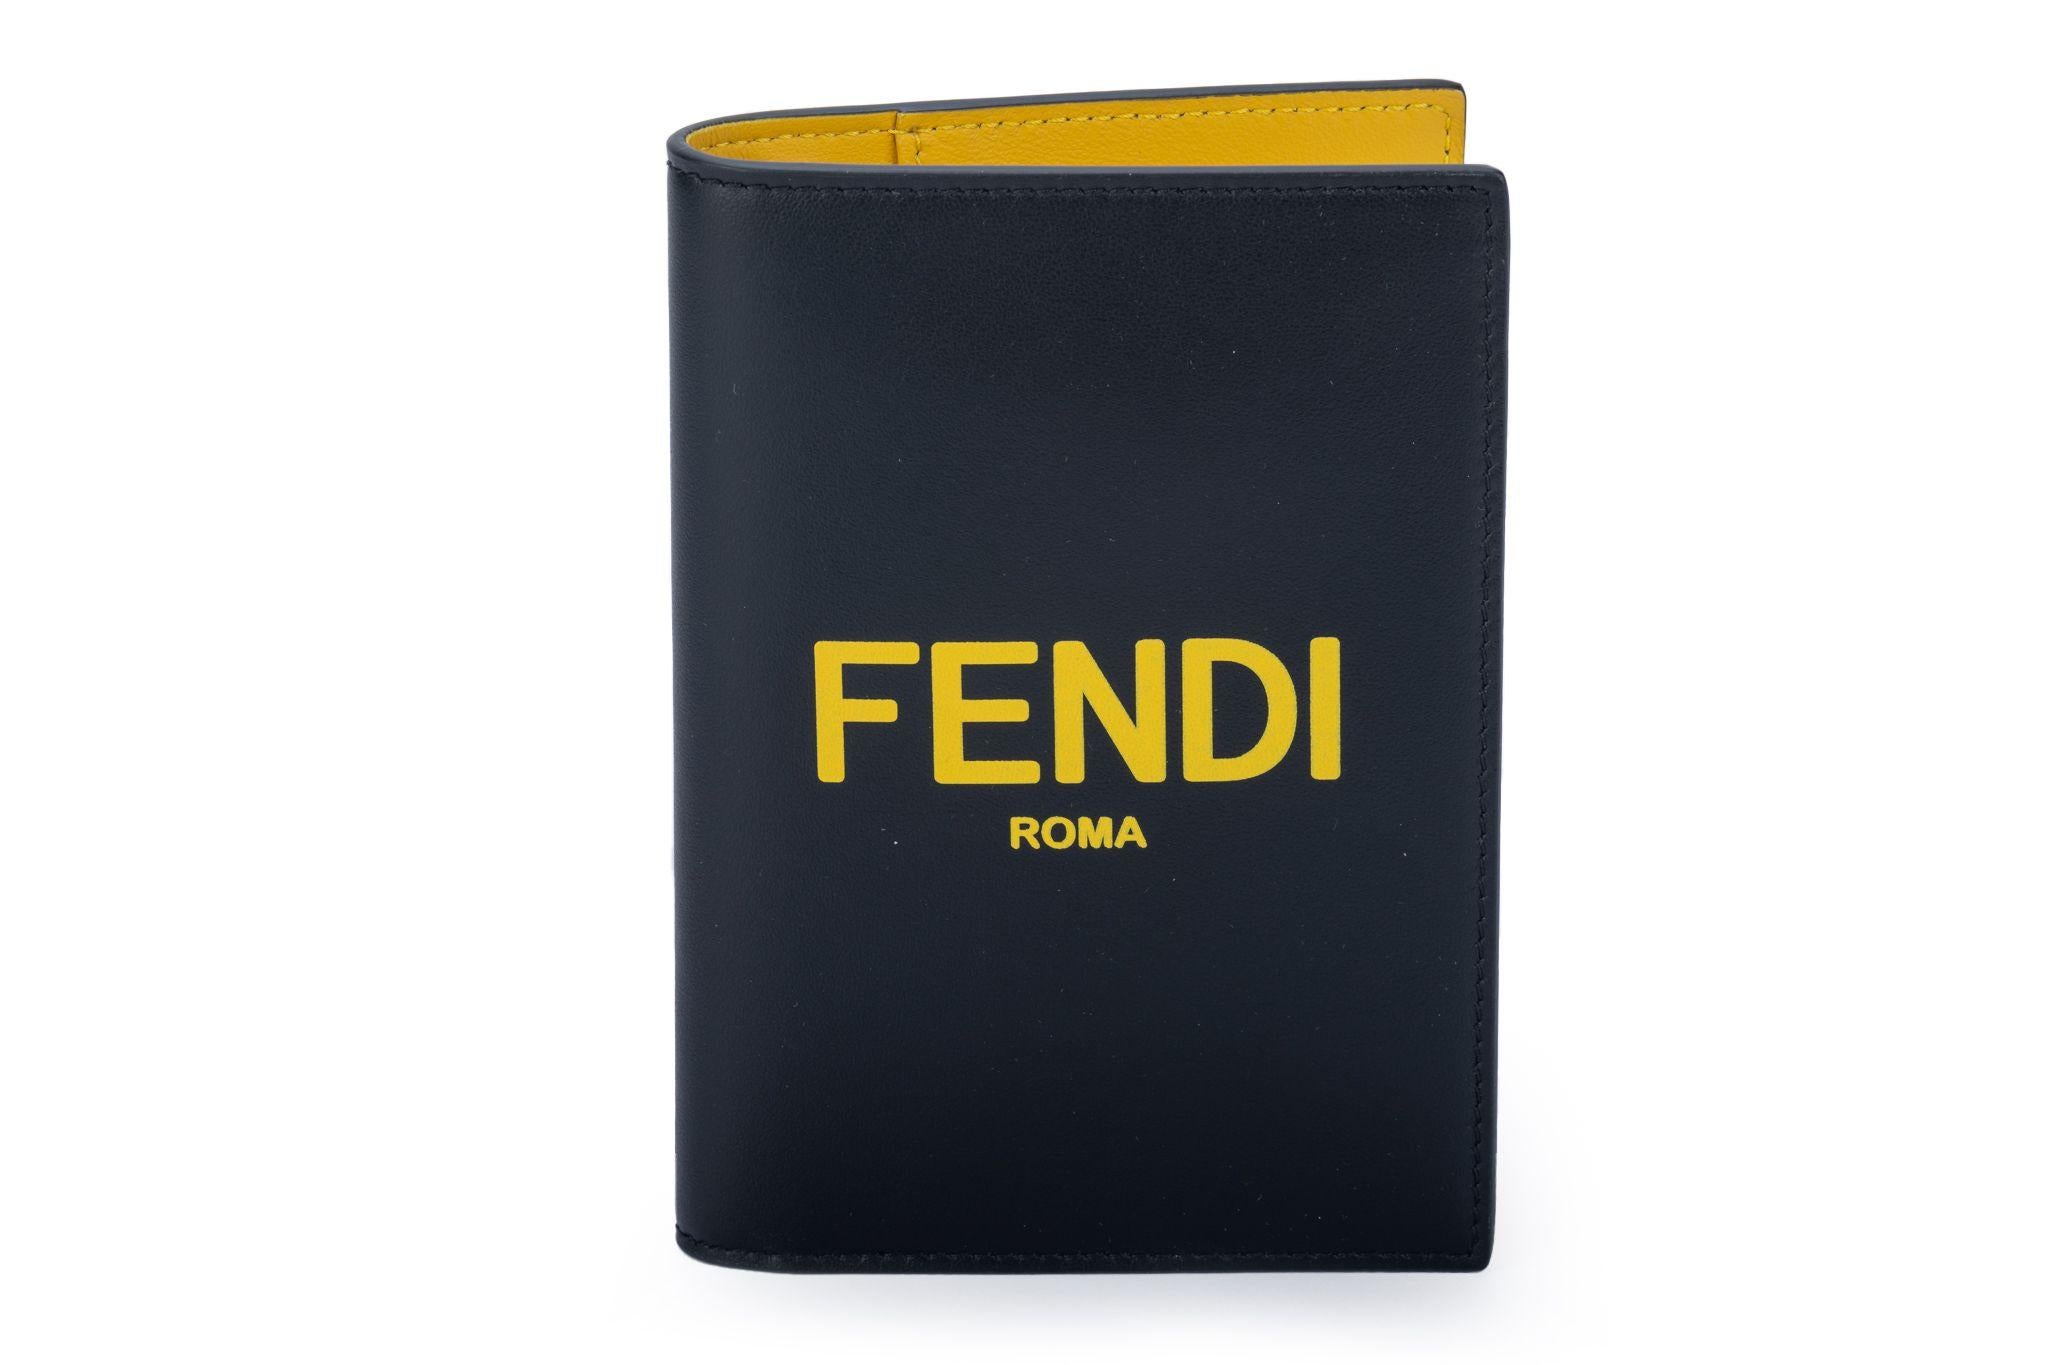 Fendi brand new black and yellow lambskin passport cover. Comes with box and original dustcover.